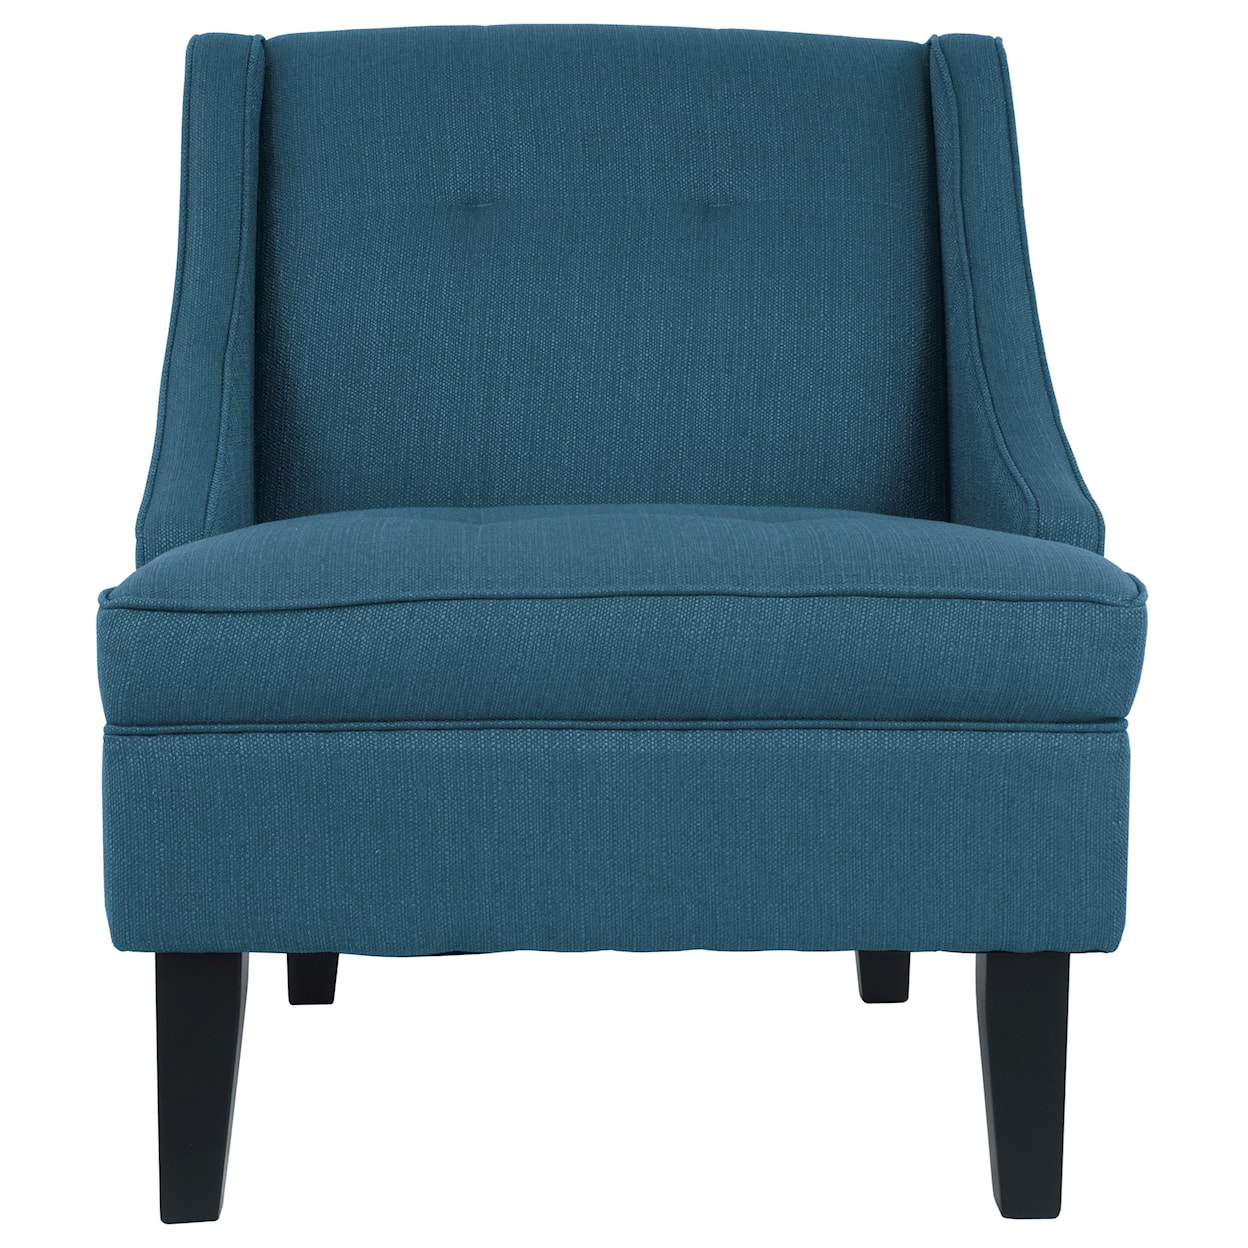 Signature Design by Ashley Clarinda Accent Chair